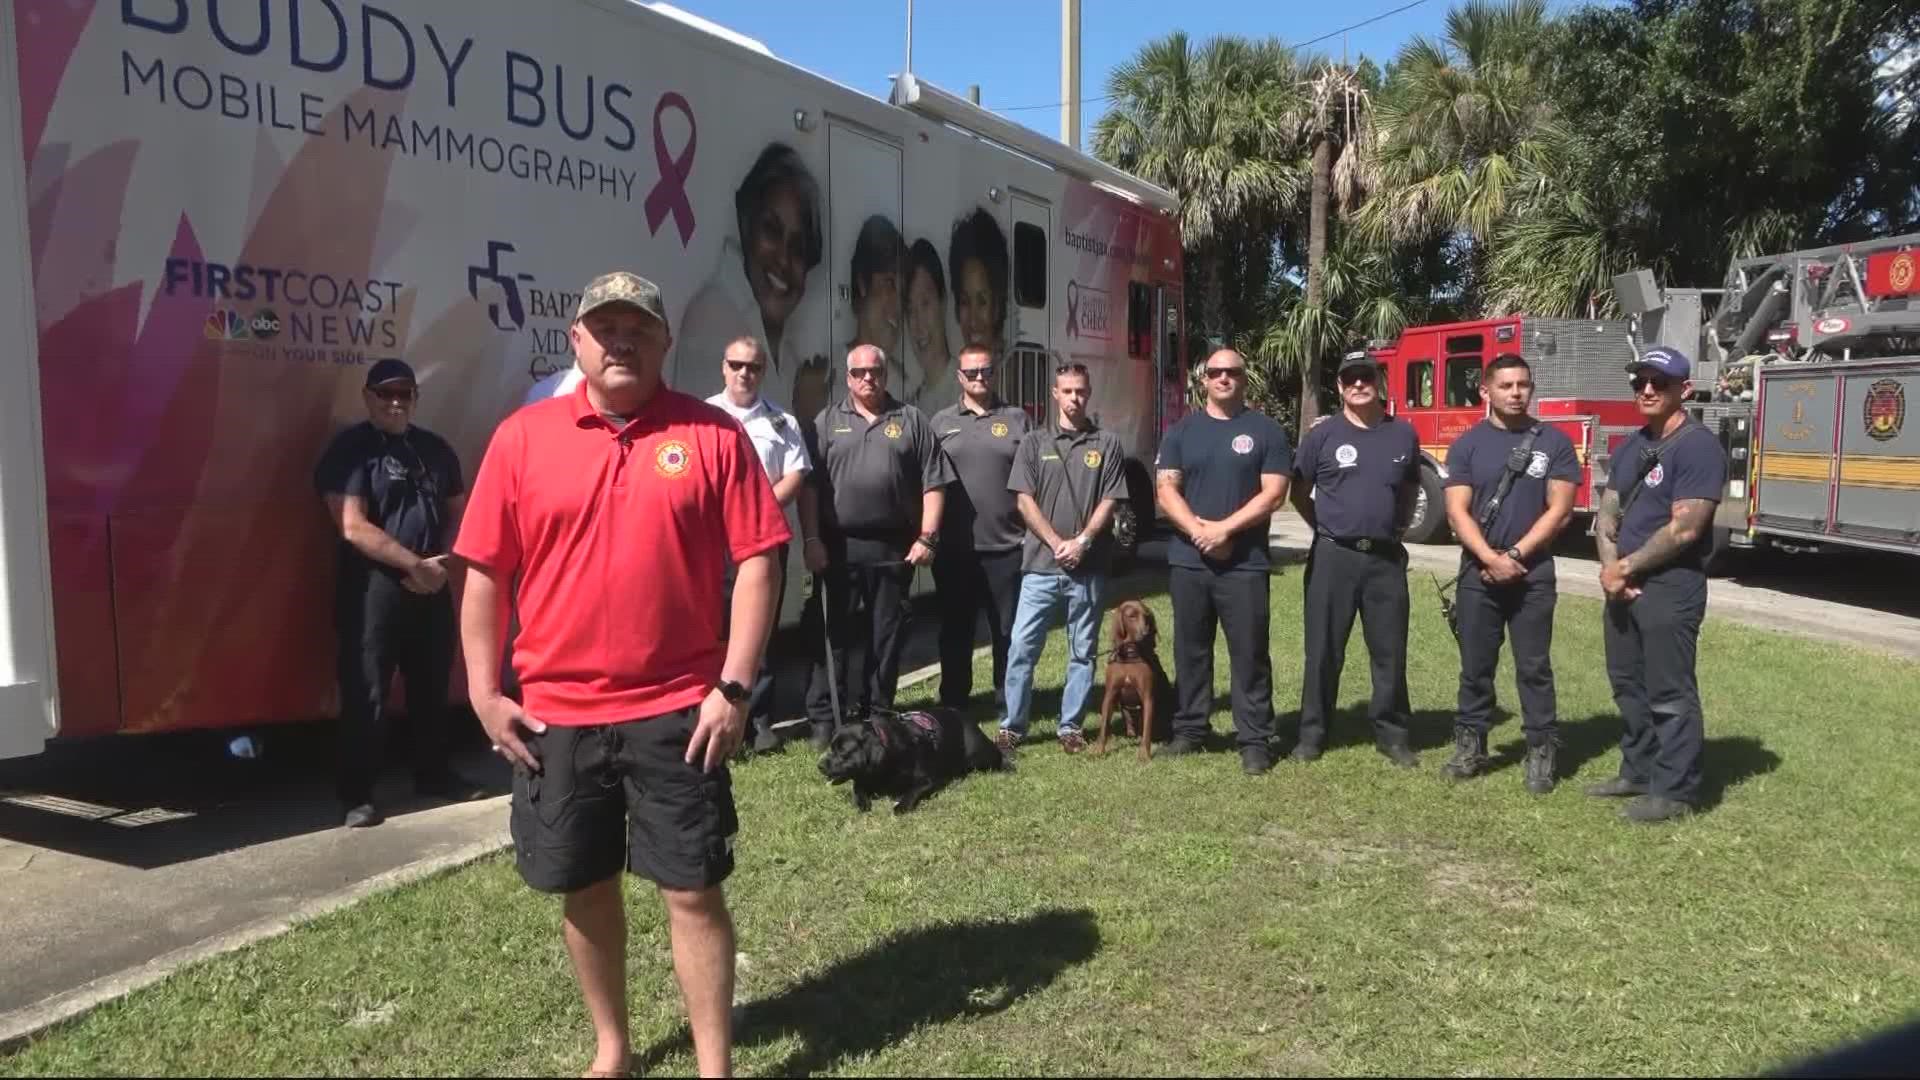 JFRD goes above and beyond every day to rescue people from fires and save them from medical emergencies. Now JFRD is supporting the Buddy Bus to save more lives.